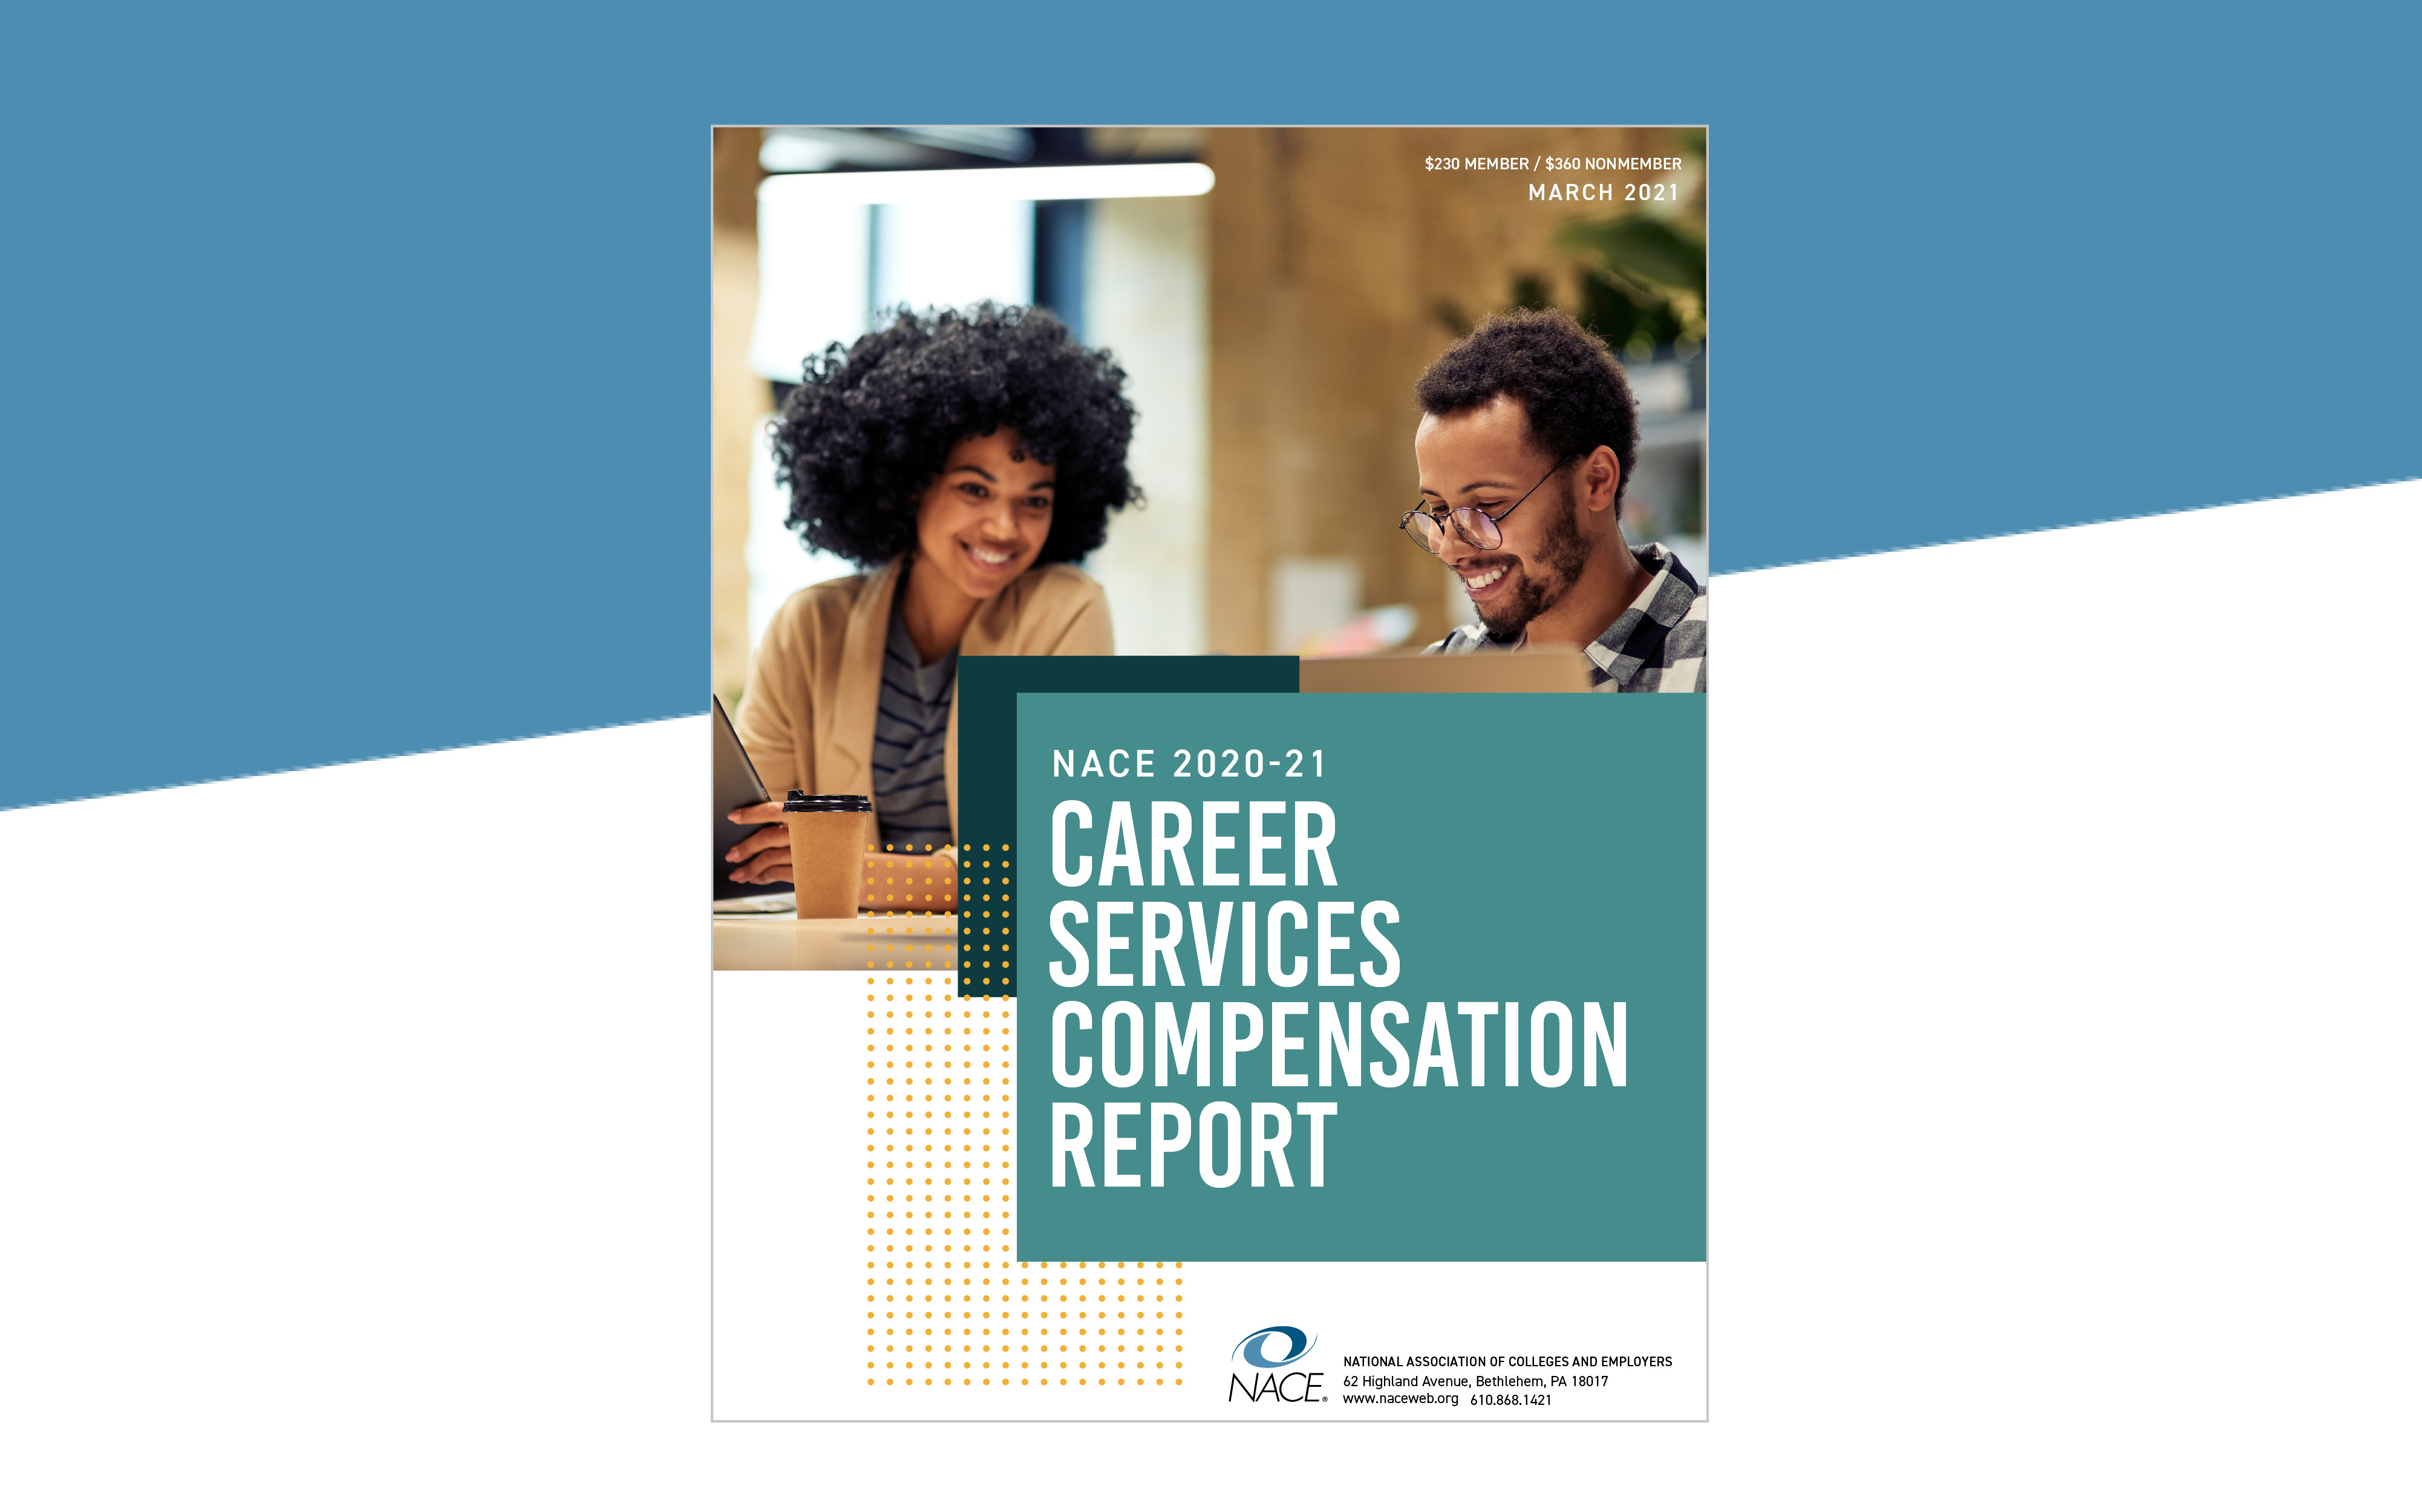 Career Services Compensation Report 2020-2021